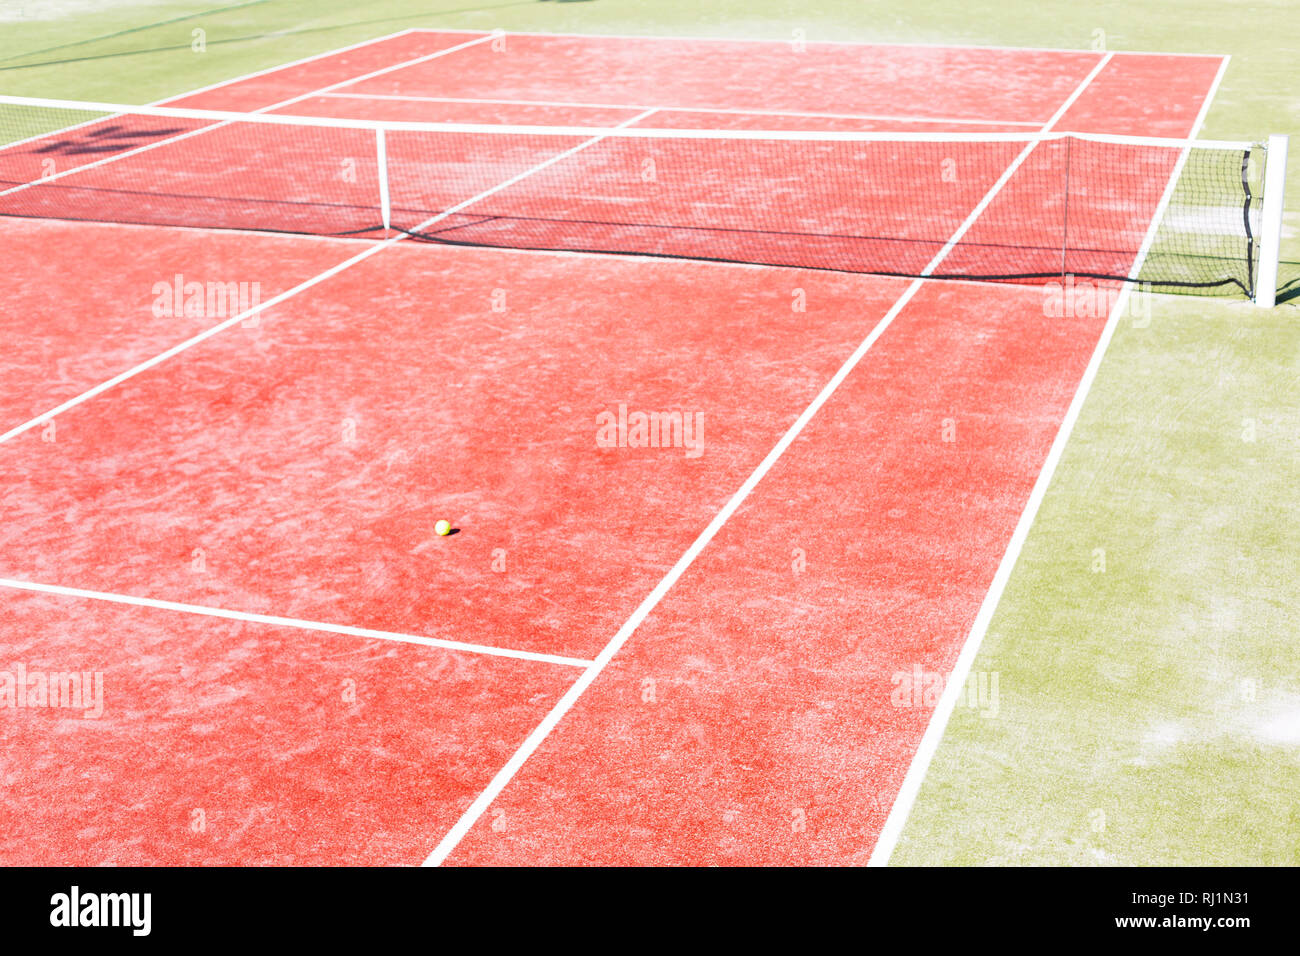 High angle view of empty red tennis court on sunny day Stock Photo